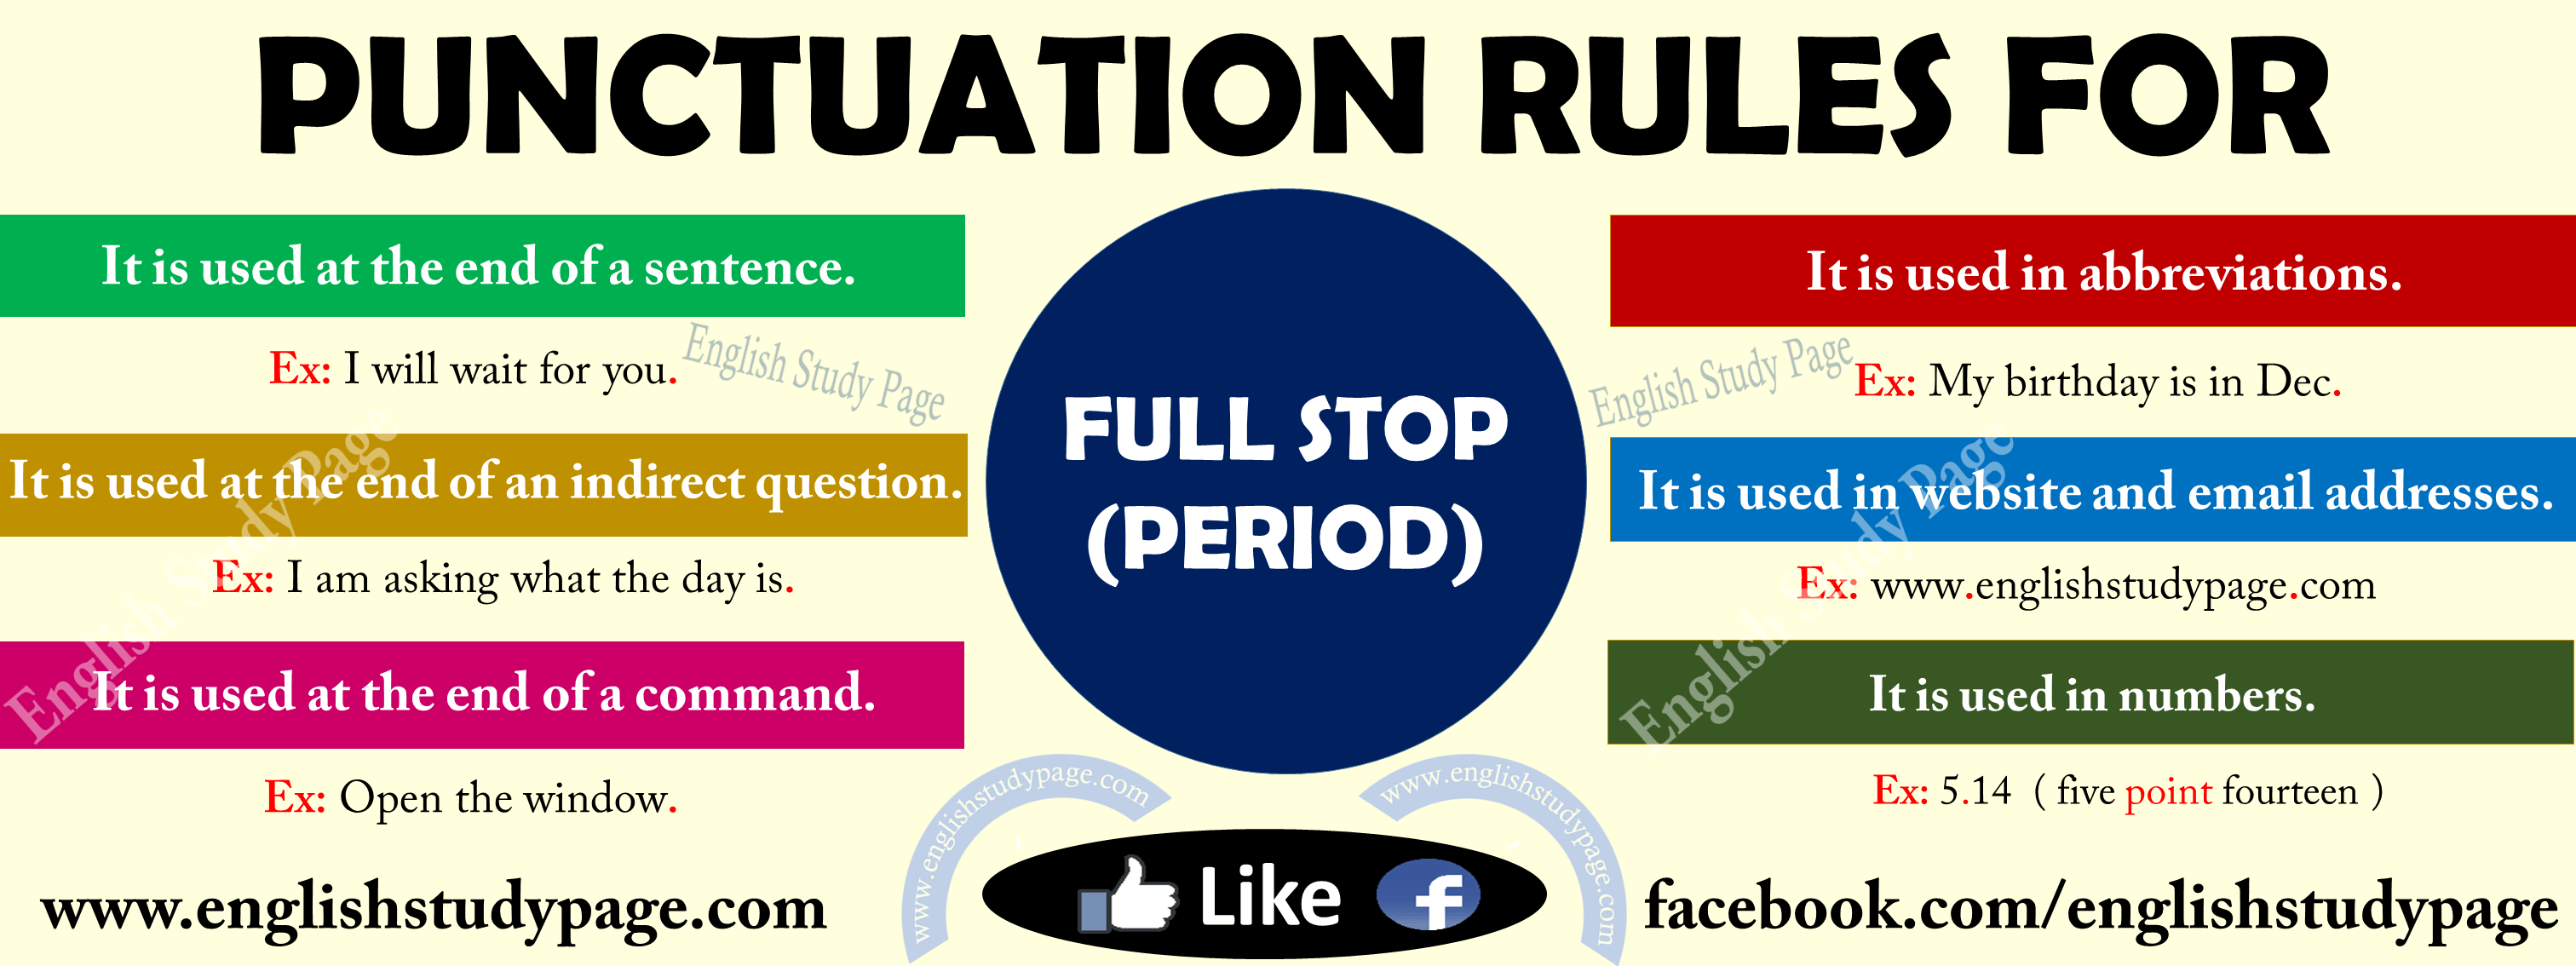 Punctuation Rules for Full Stop ( or Period or Point )